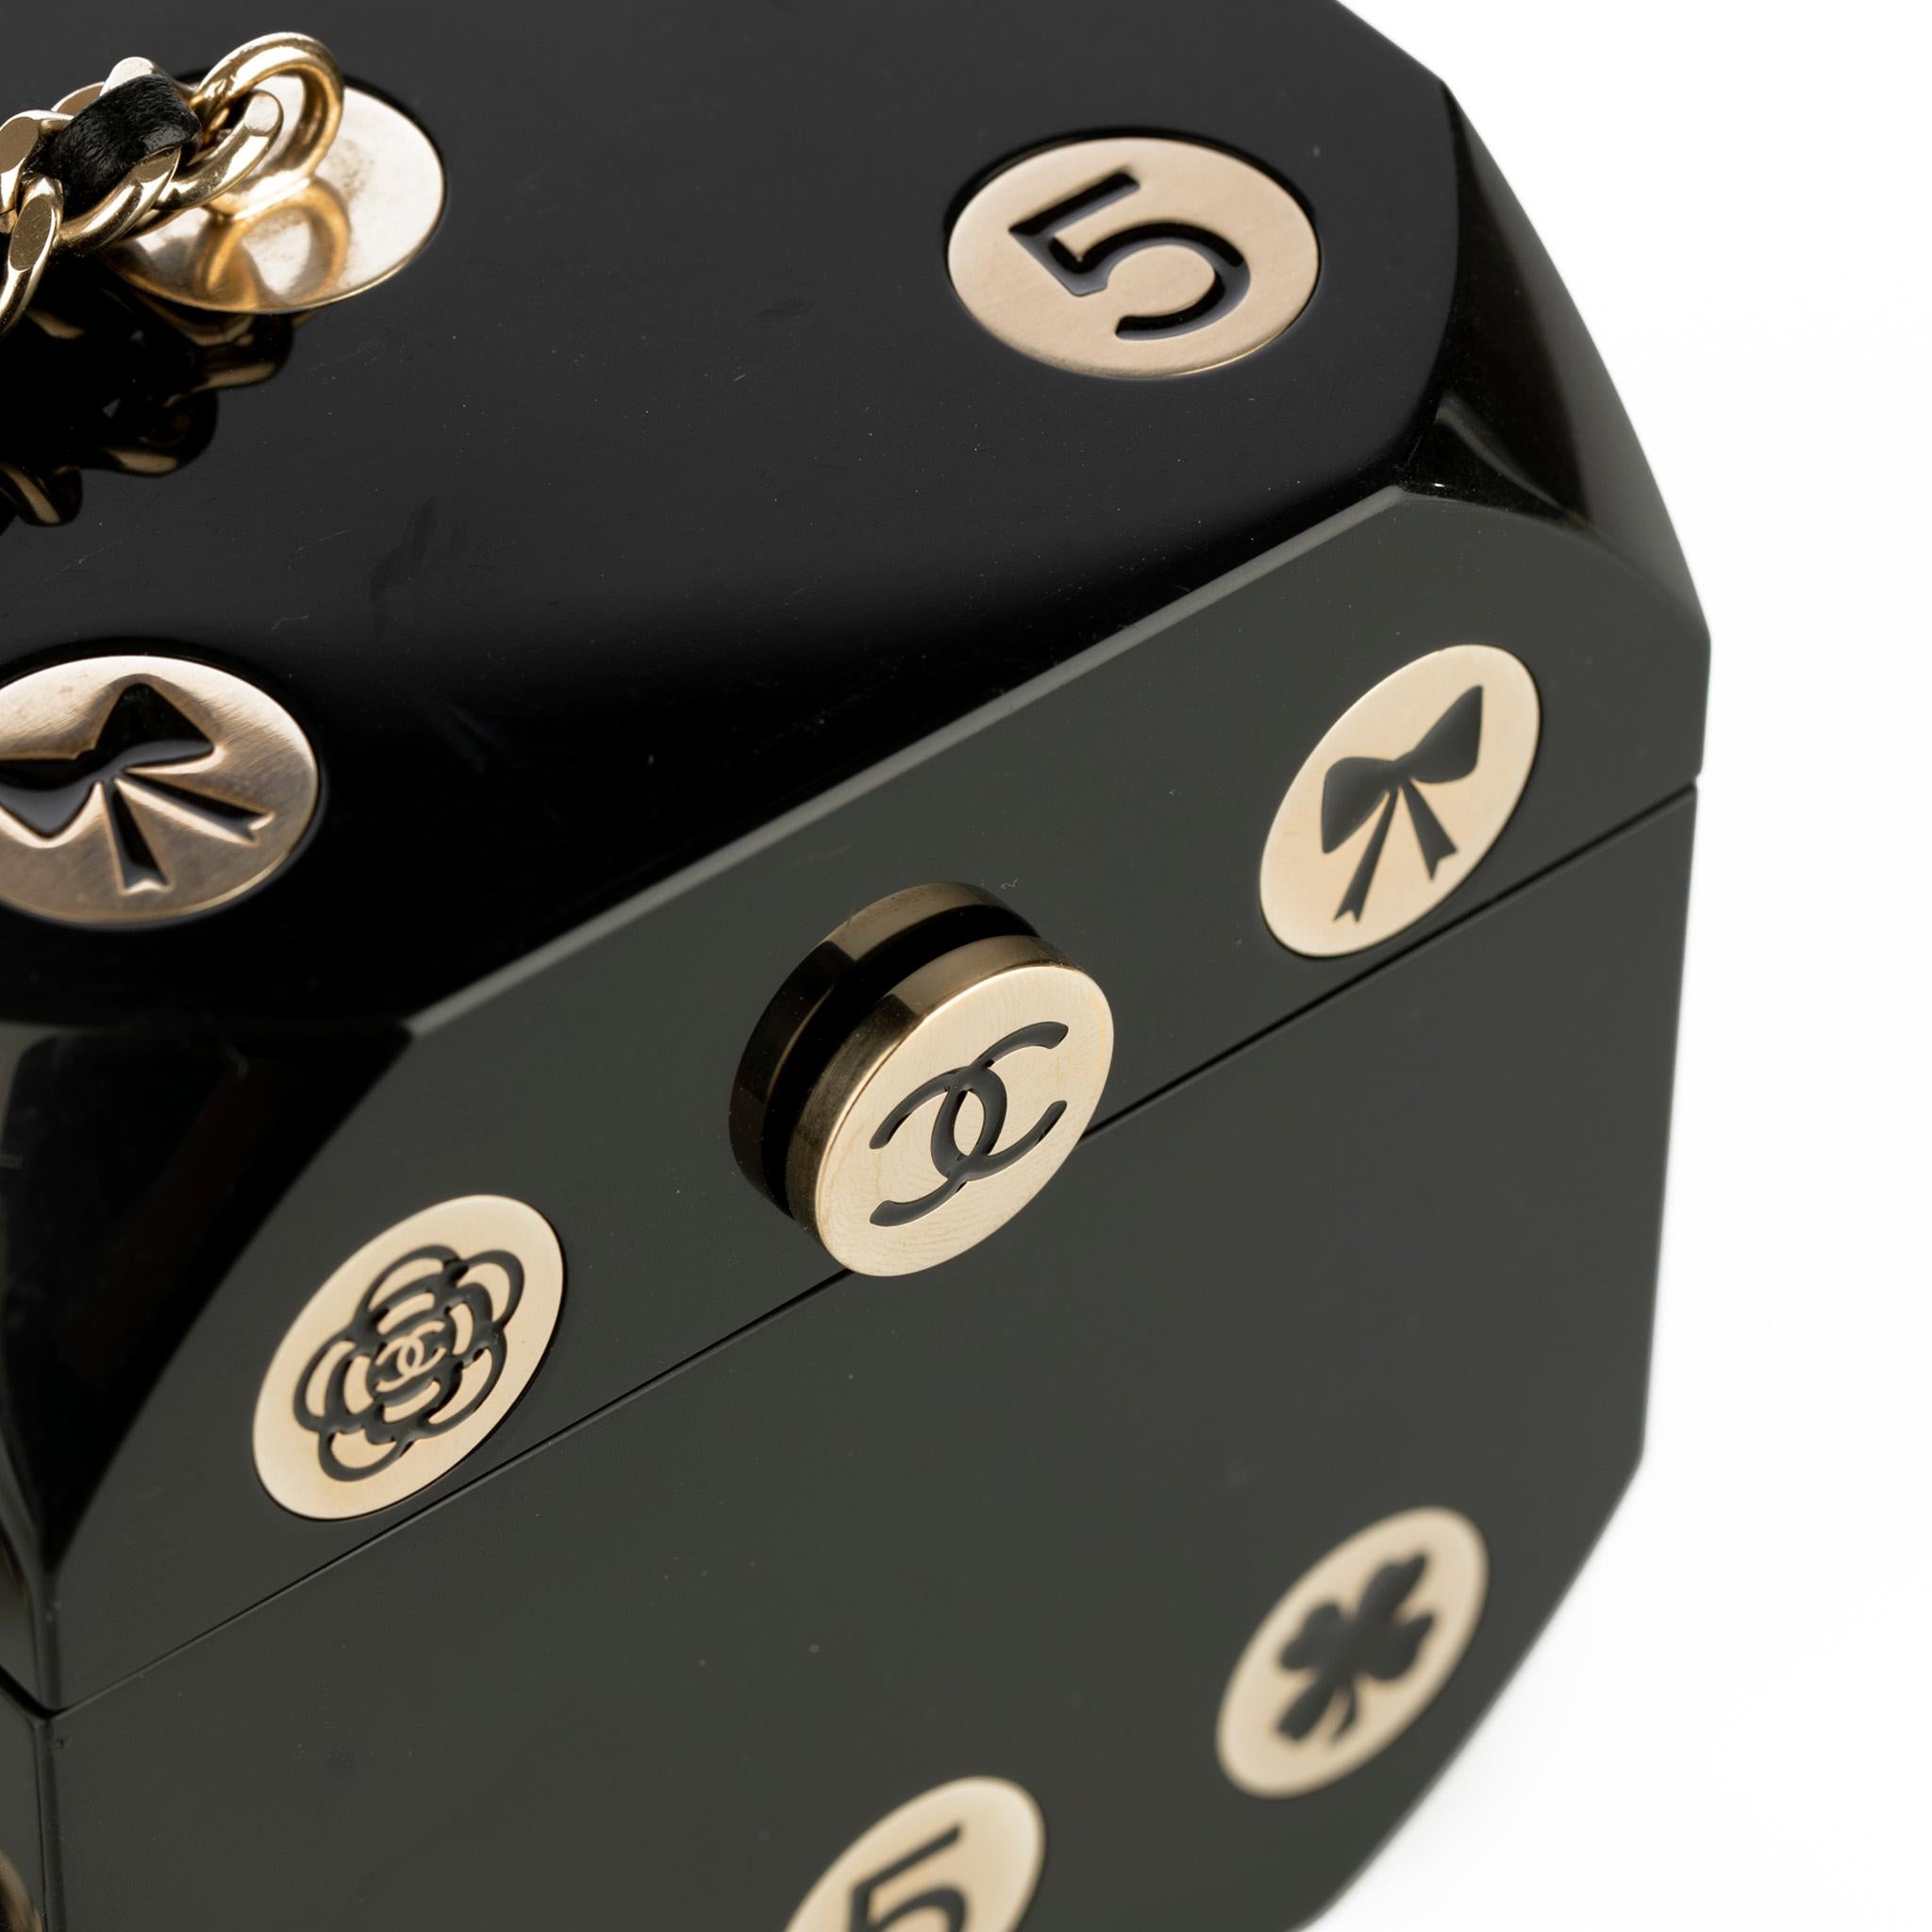 Chanel Minaudière Limited Edition Casino Dice Black Gold-Tone Hardware For Sale 2